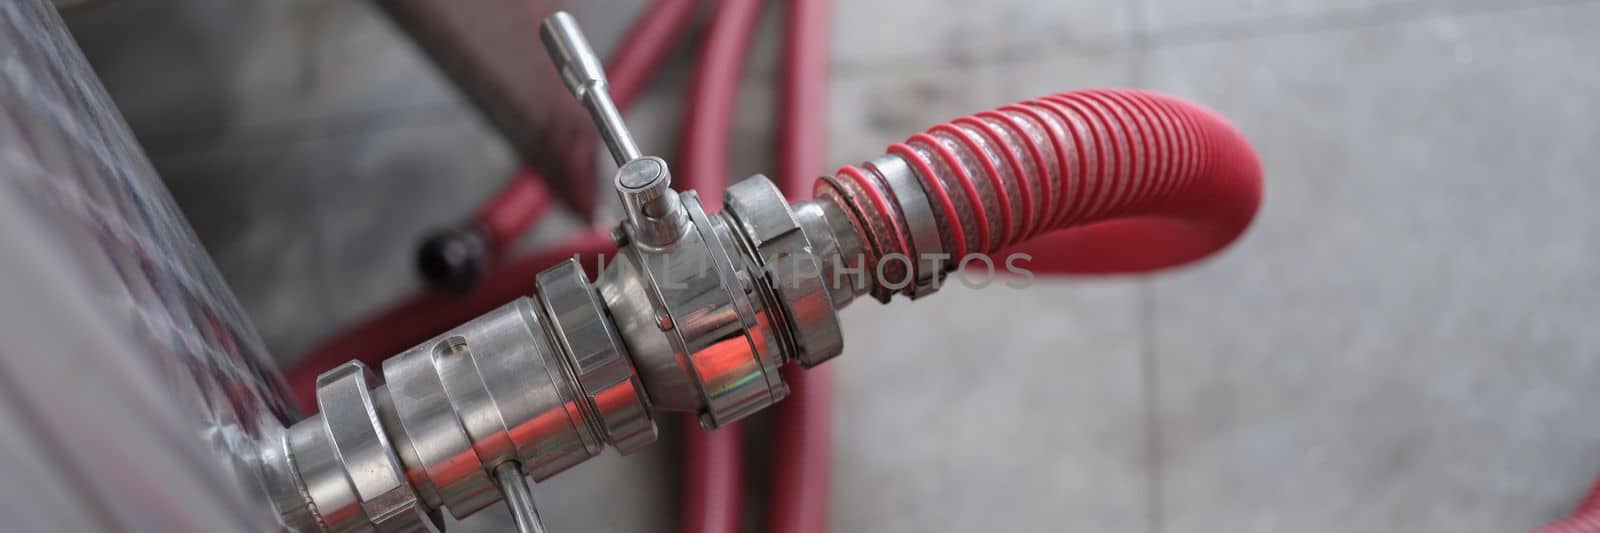 Industrial stainless steel pipe equipment with faucet and hose in wine production or chemical pharmaceutical production by kuprevich